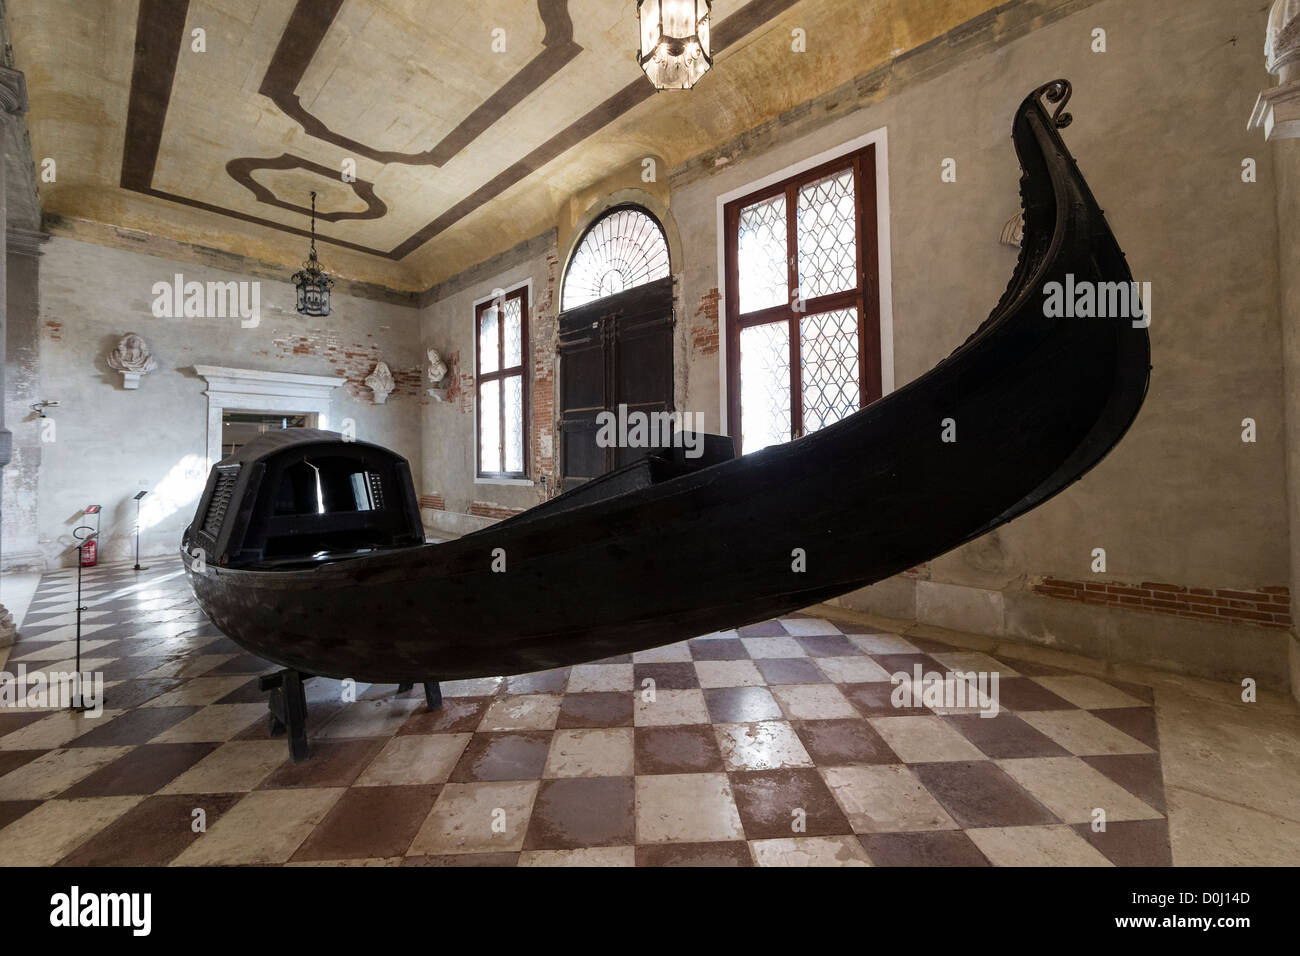 An antique gondola painted black, with a covered cabin, on display at the C'a Rezzonico museum in Venice Stock Photo